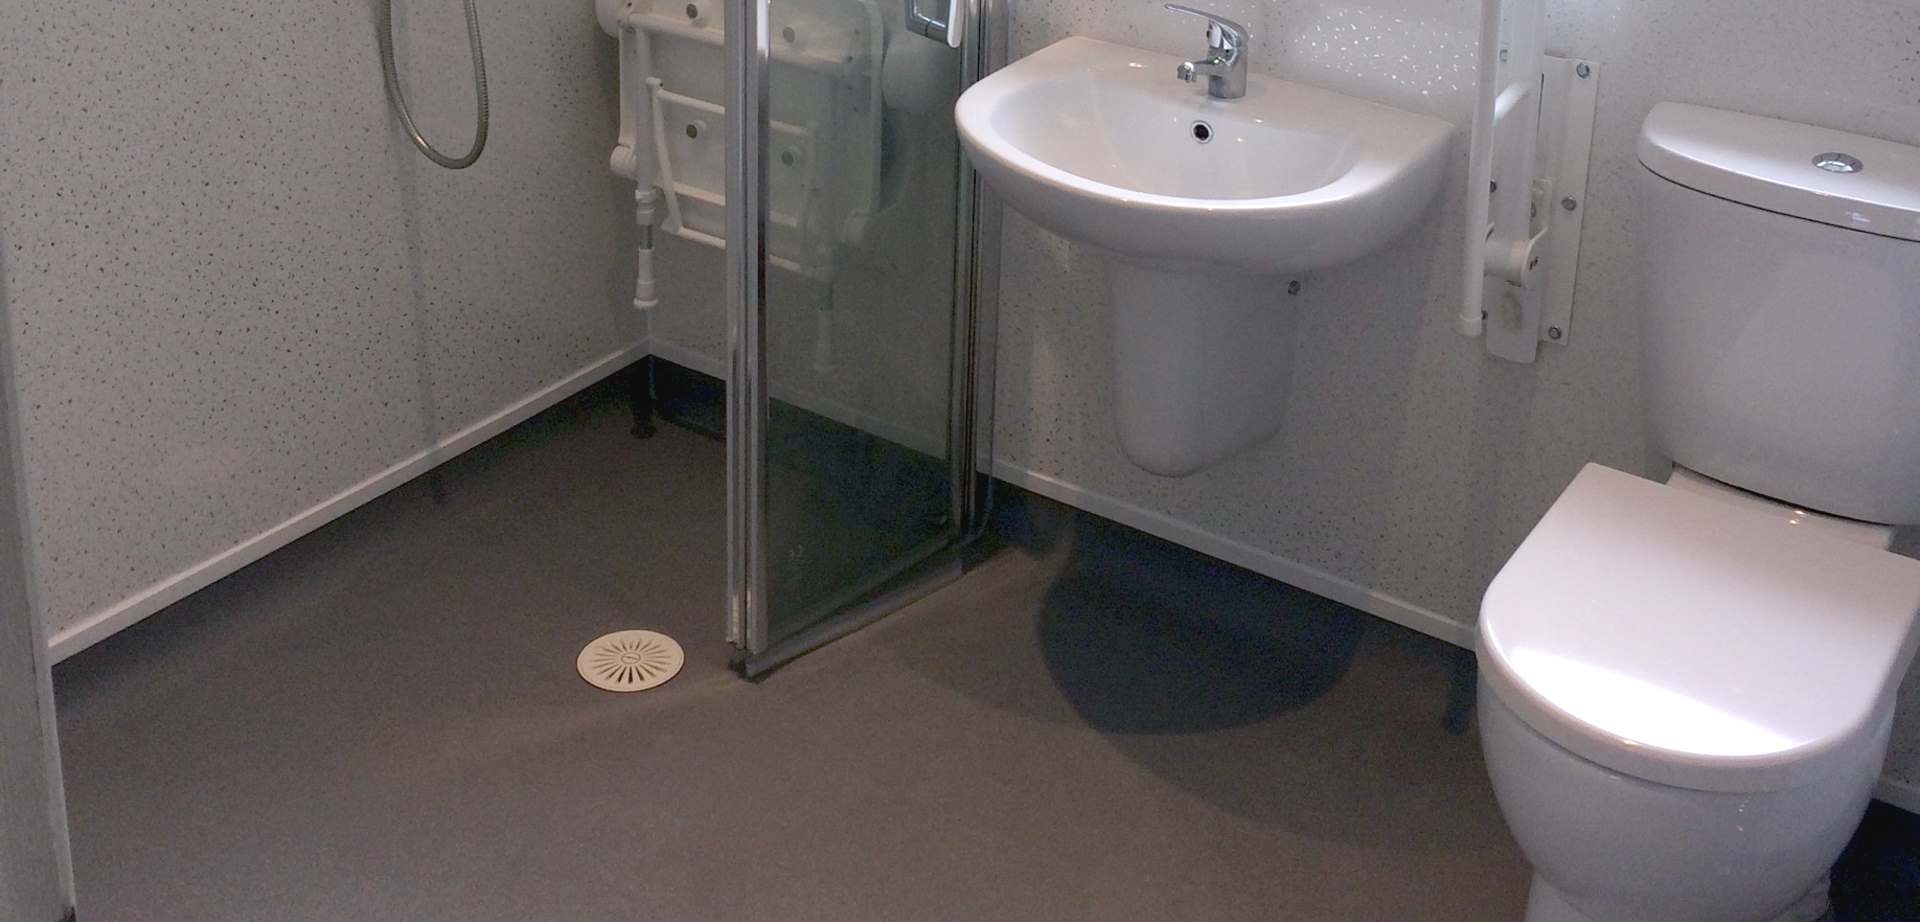 Wetroom Installers in Tamworth and The Midlands